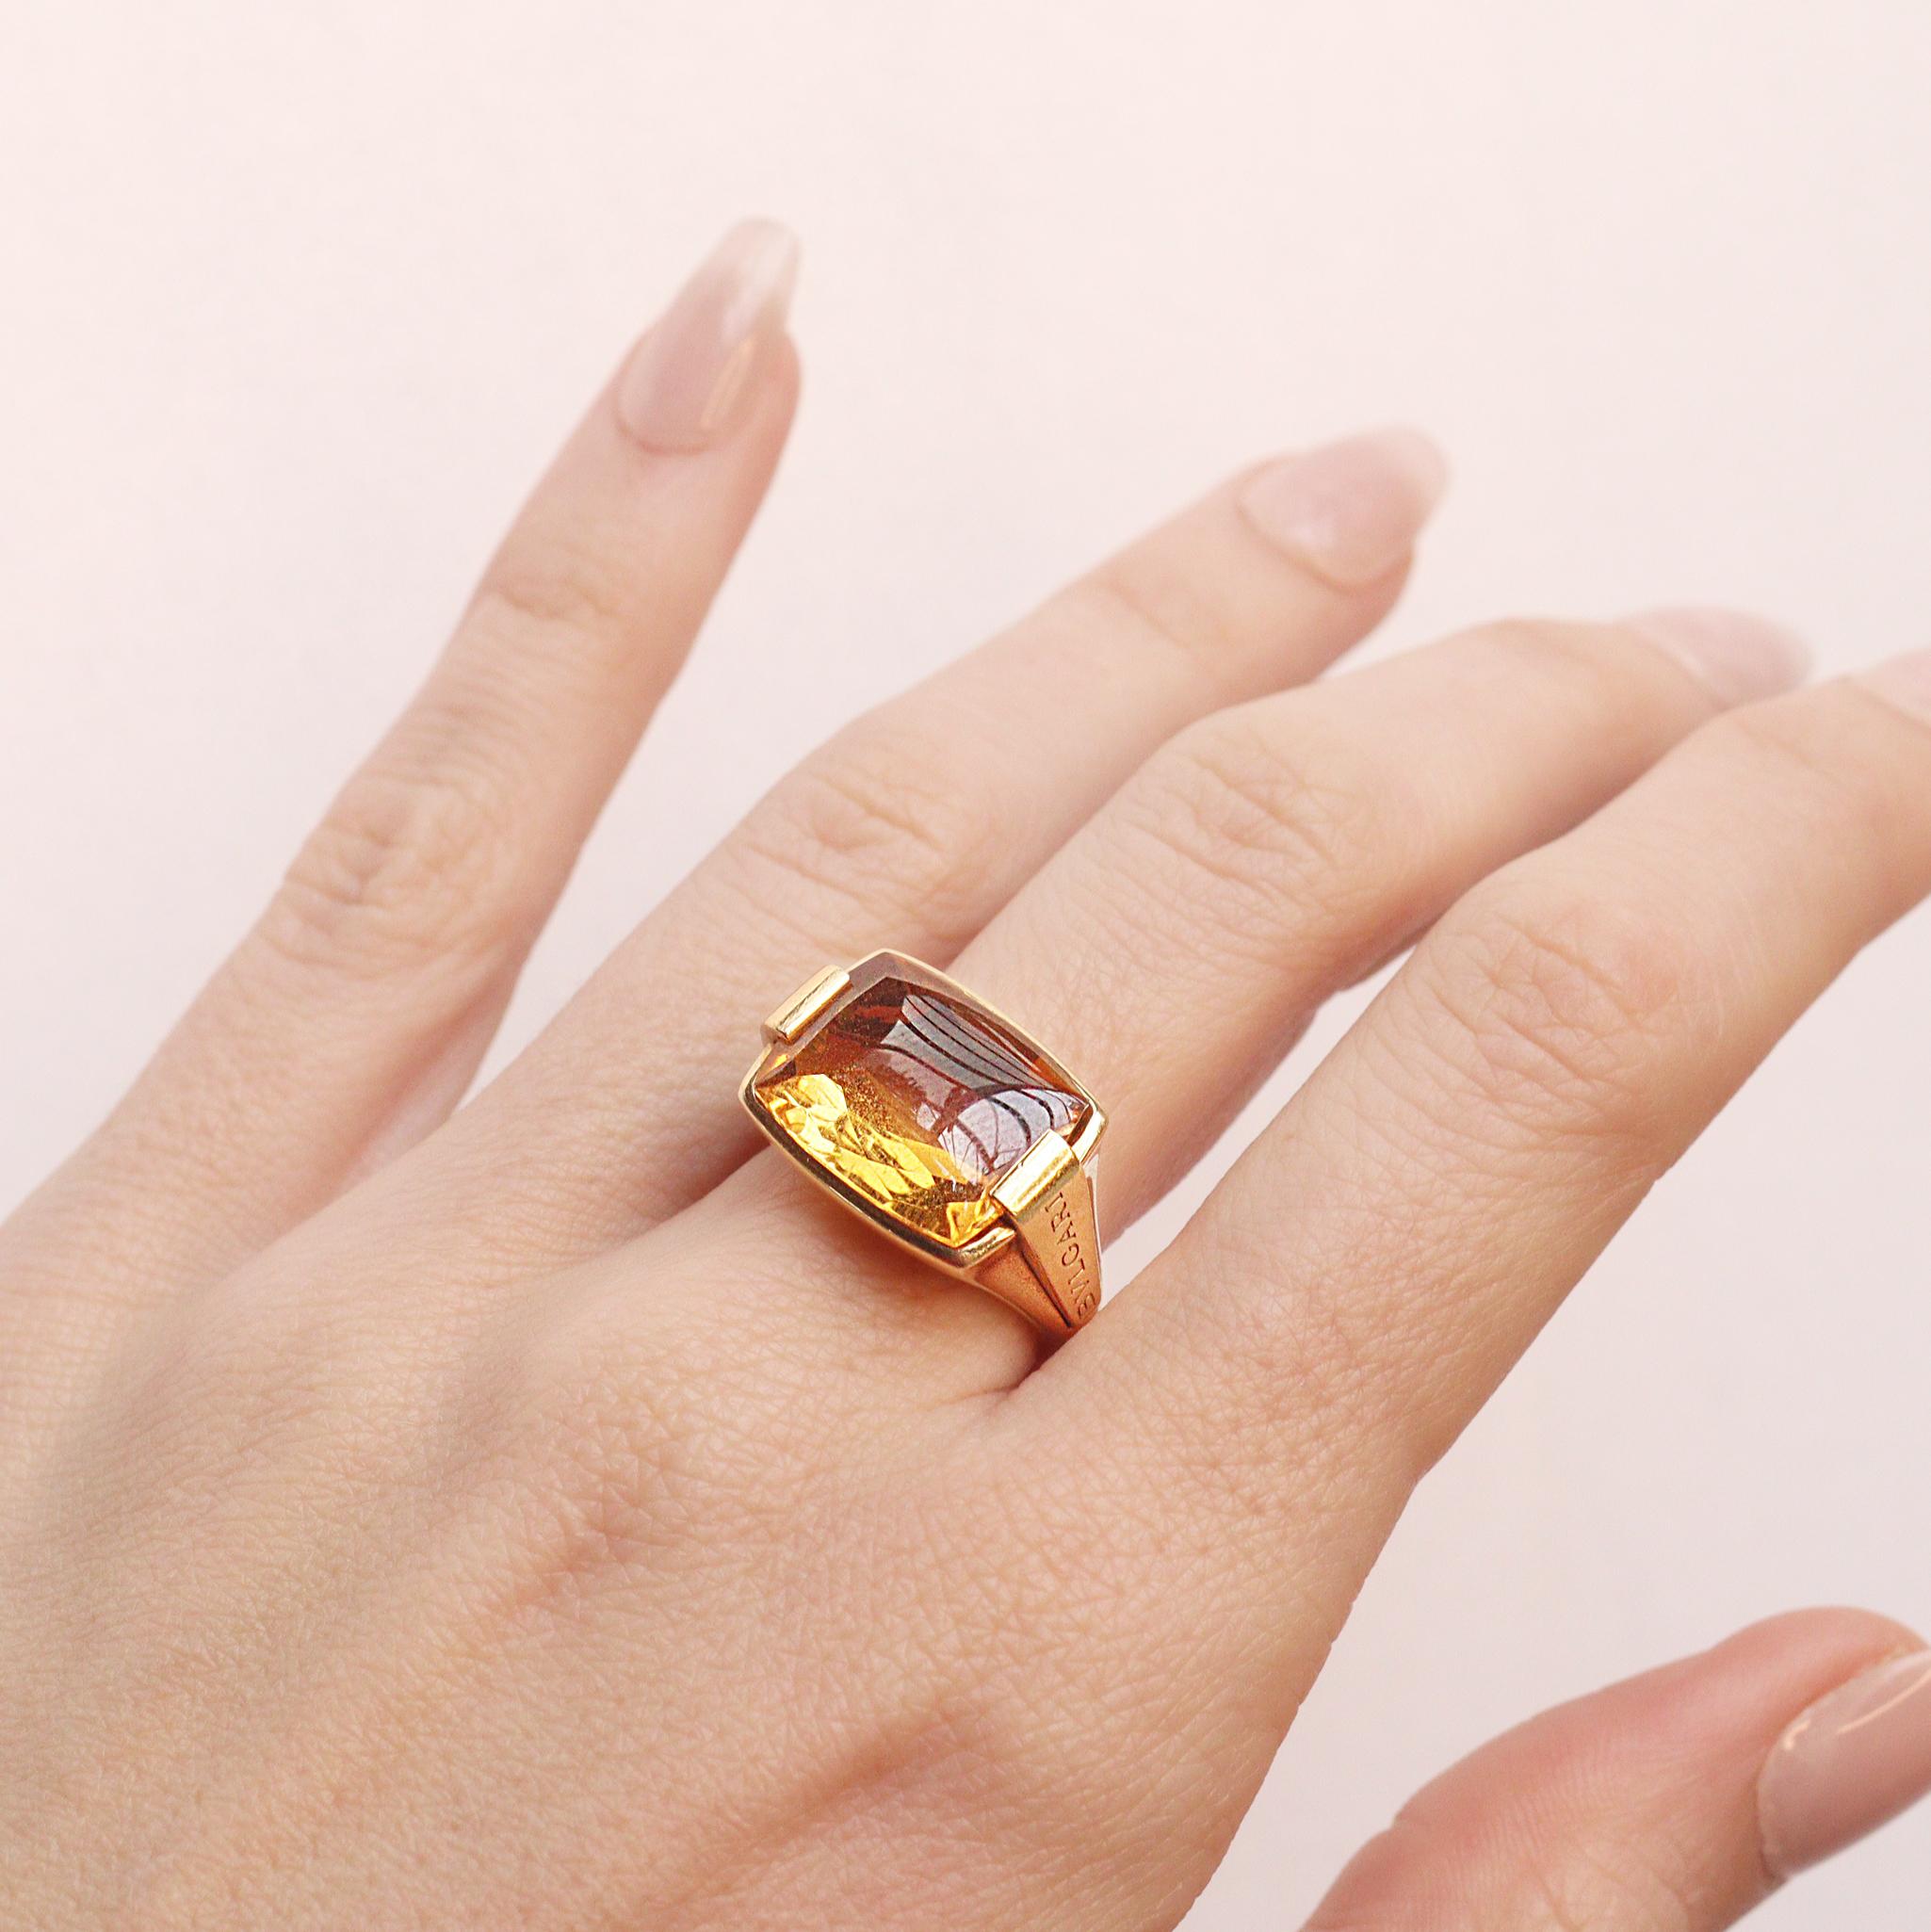 Vintage Citrine Signed Bvlgari Metropolis 18k Gold Ring In Excellent Condition For Sale In New York, NY